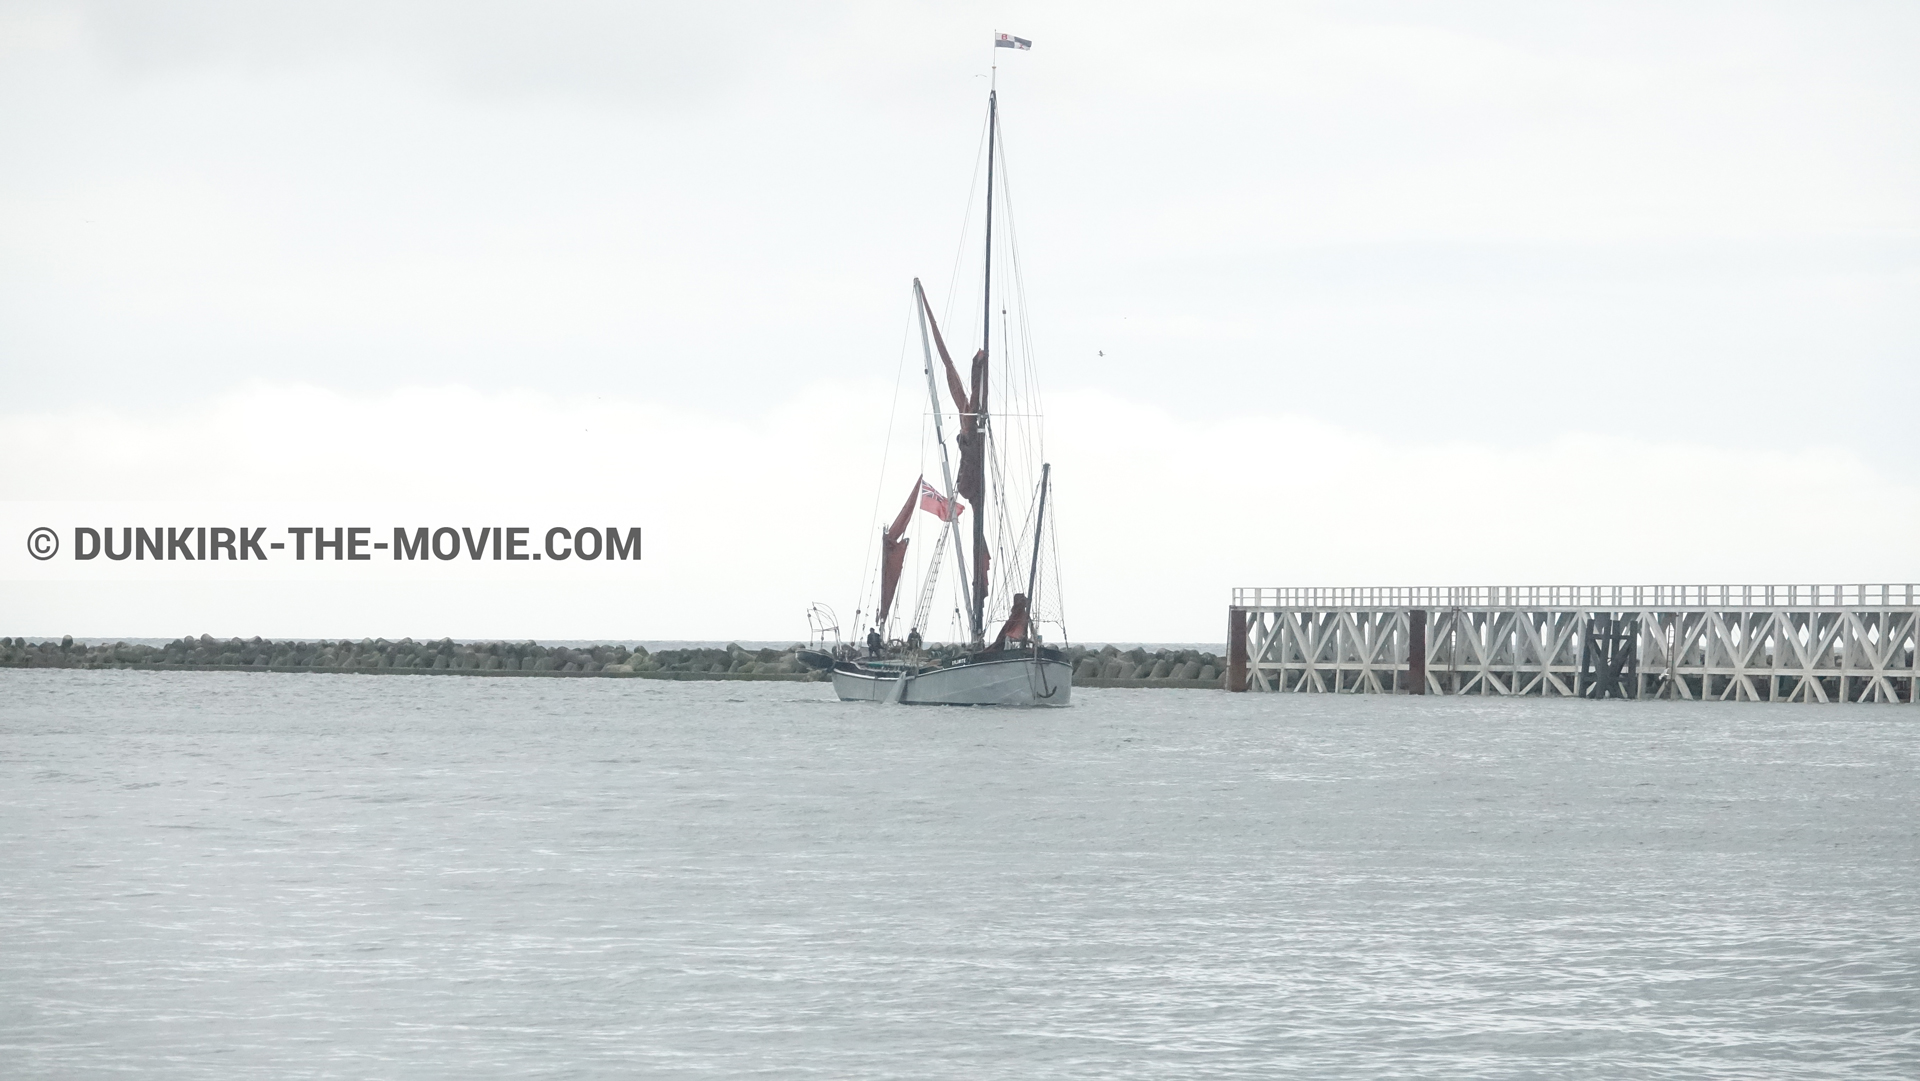 Picture with boat, EST pier, Xylonite,  from behind the scene of the Dunkirk movie by Nolan